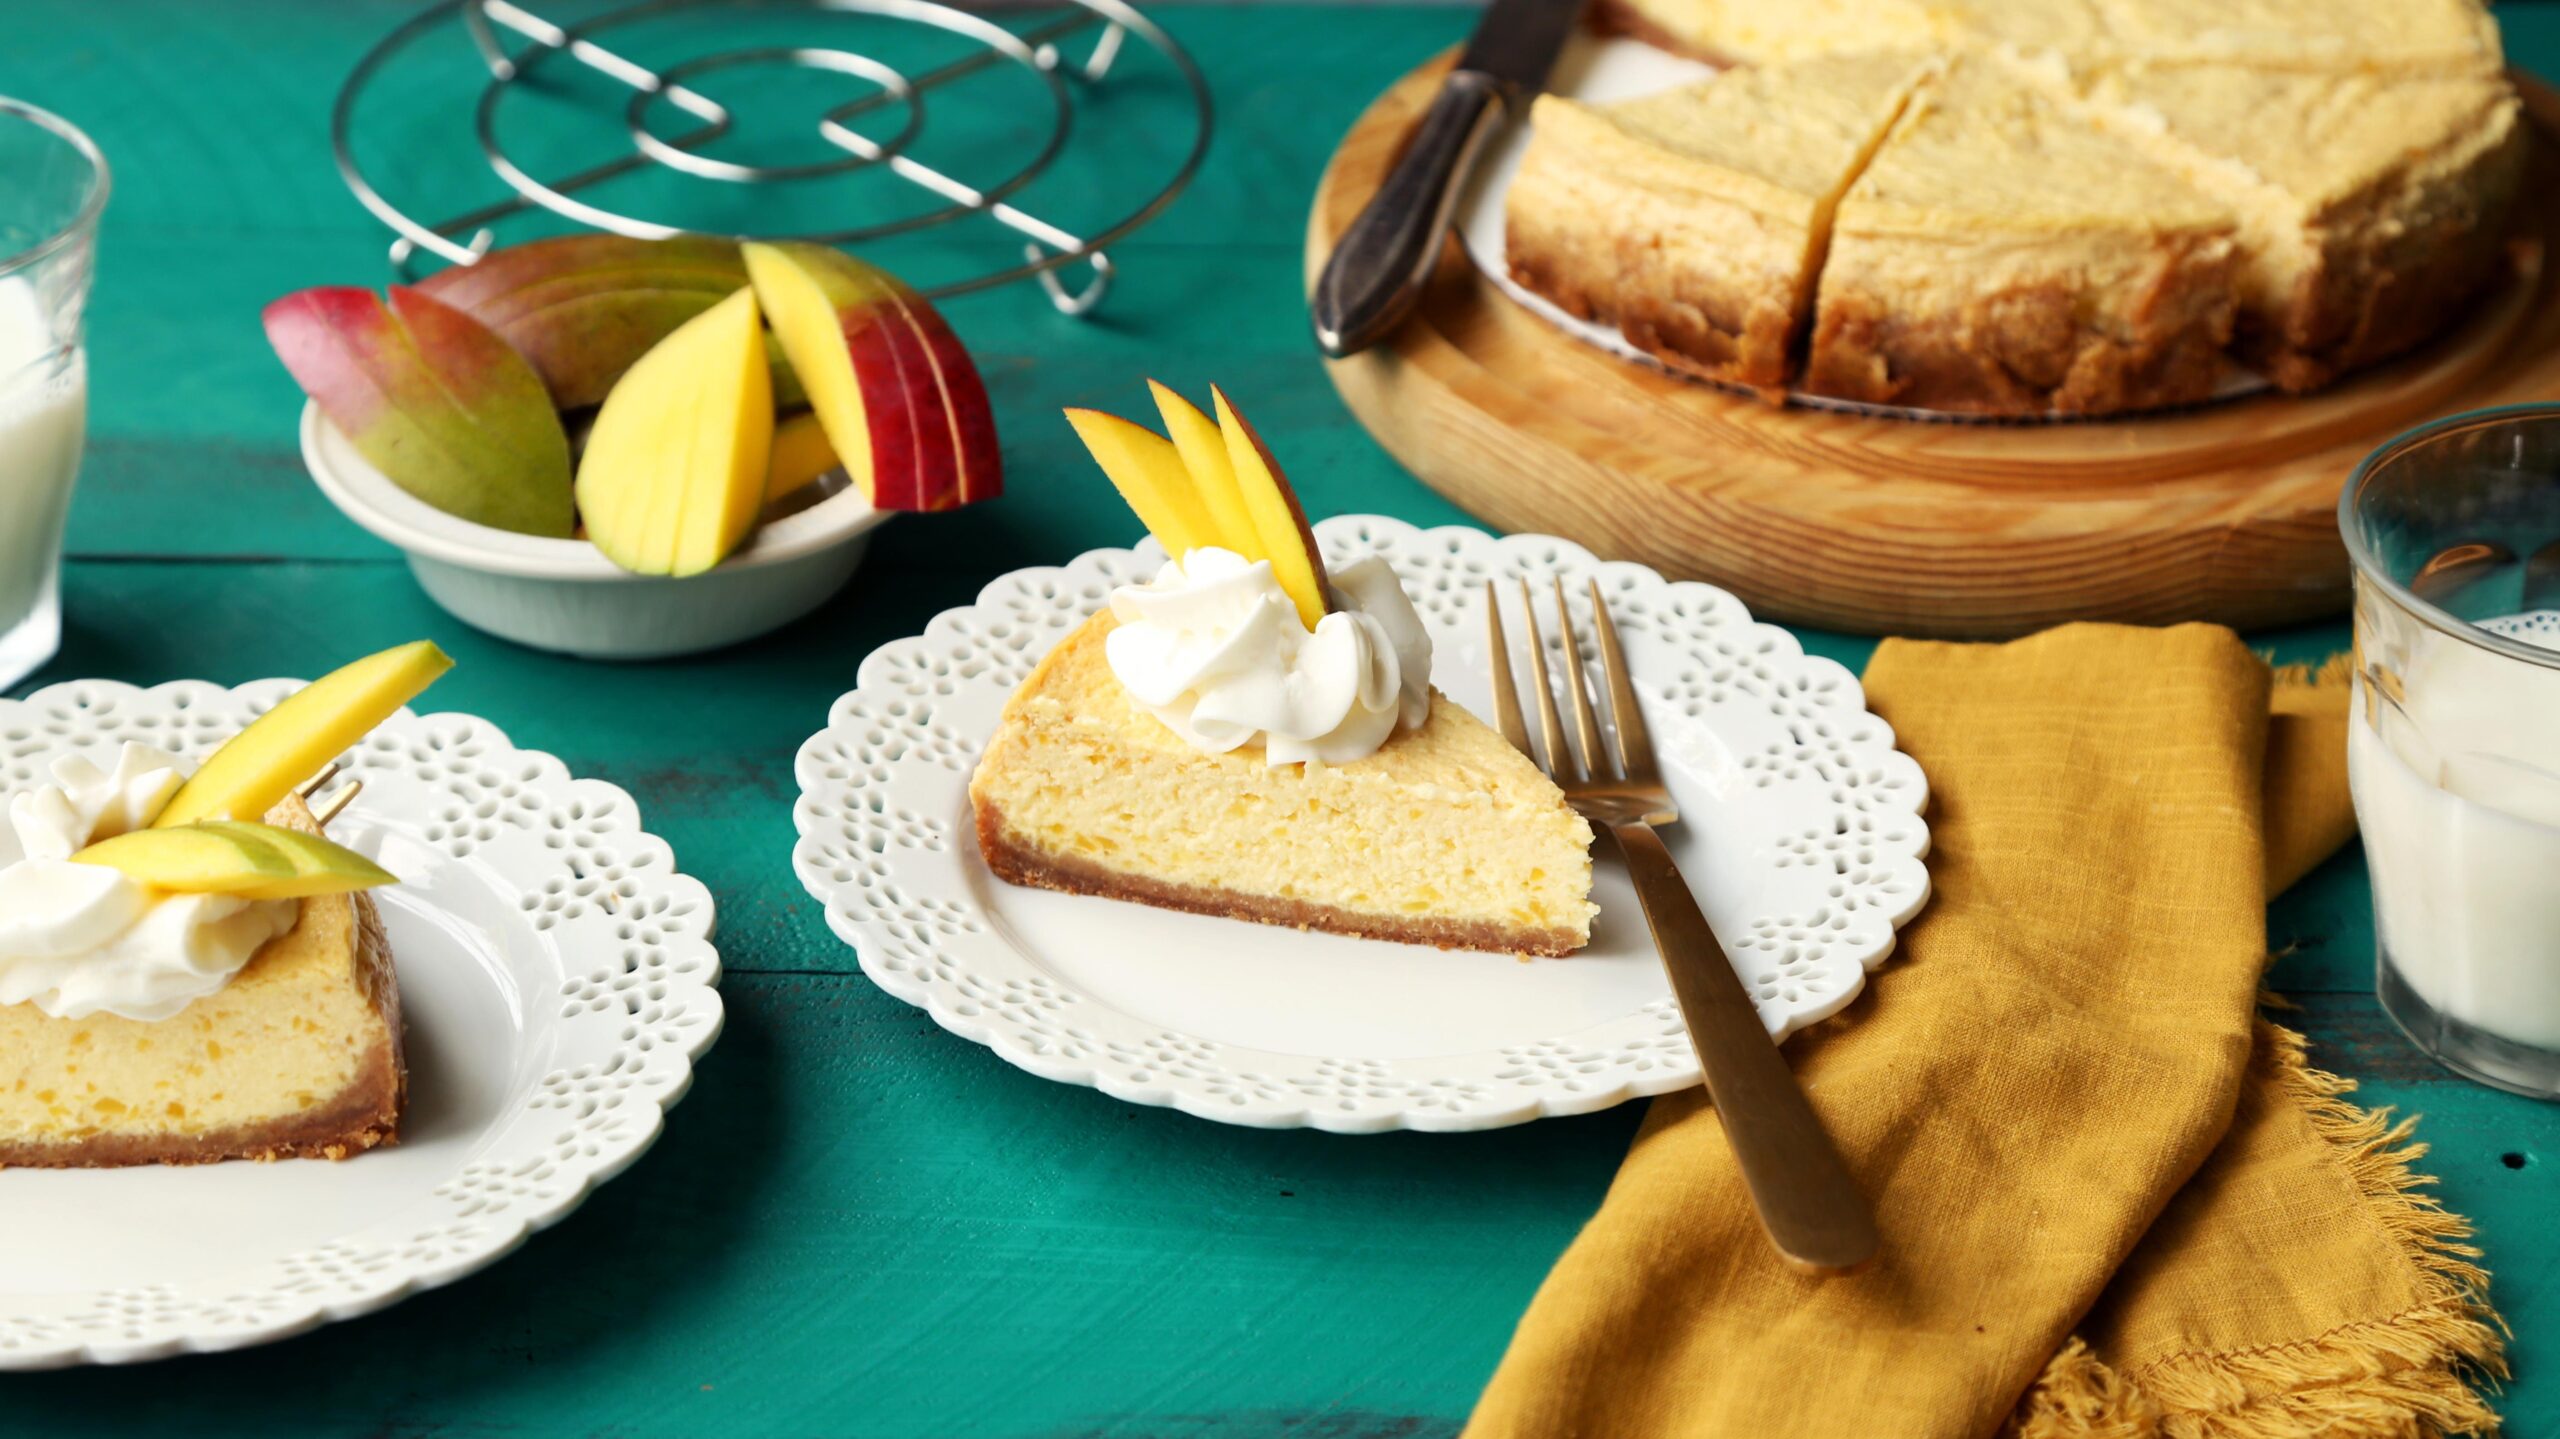  This cheesecake is made with fresh mangos, for a fruity twist on a classic dessert.